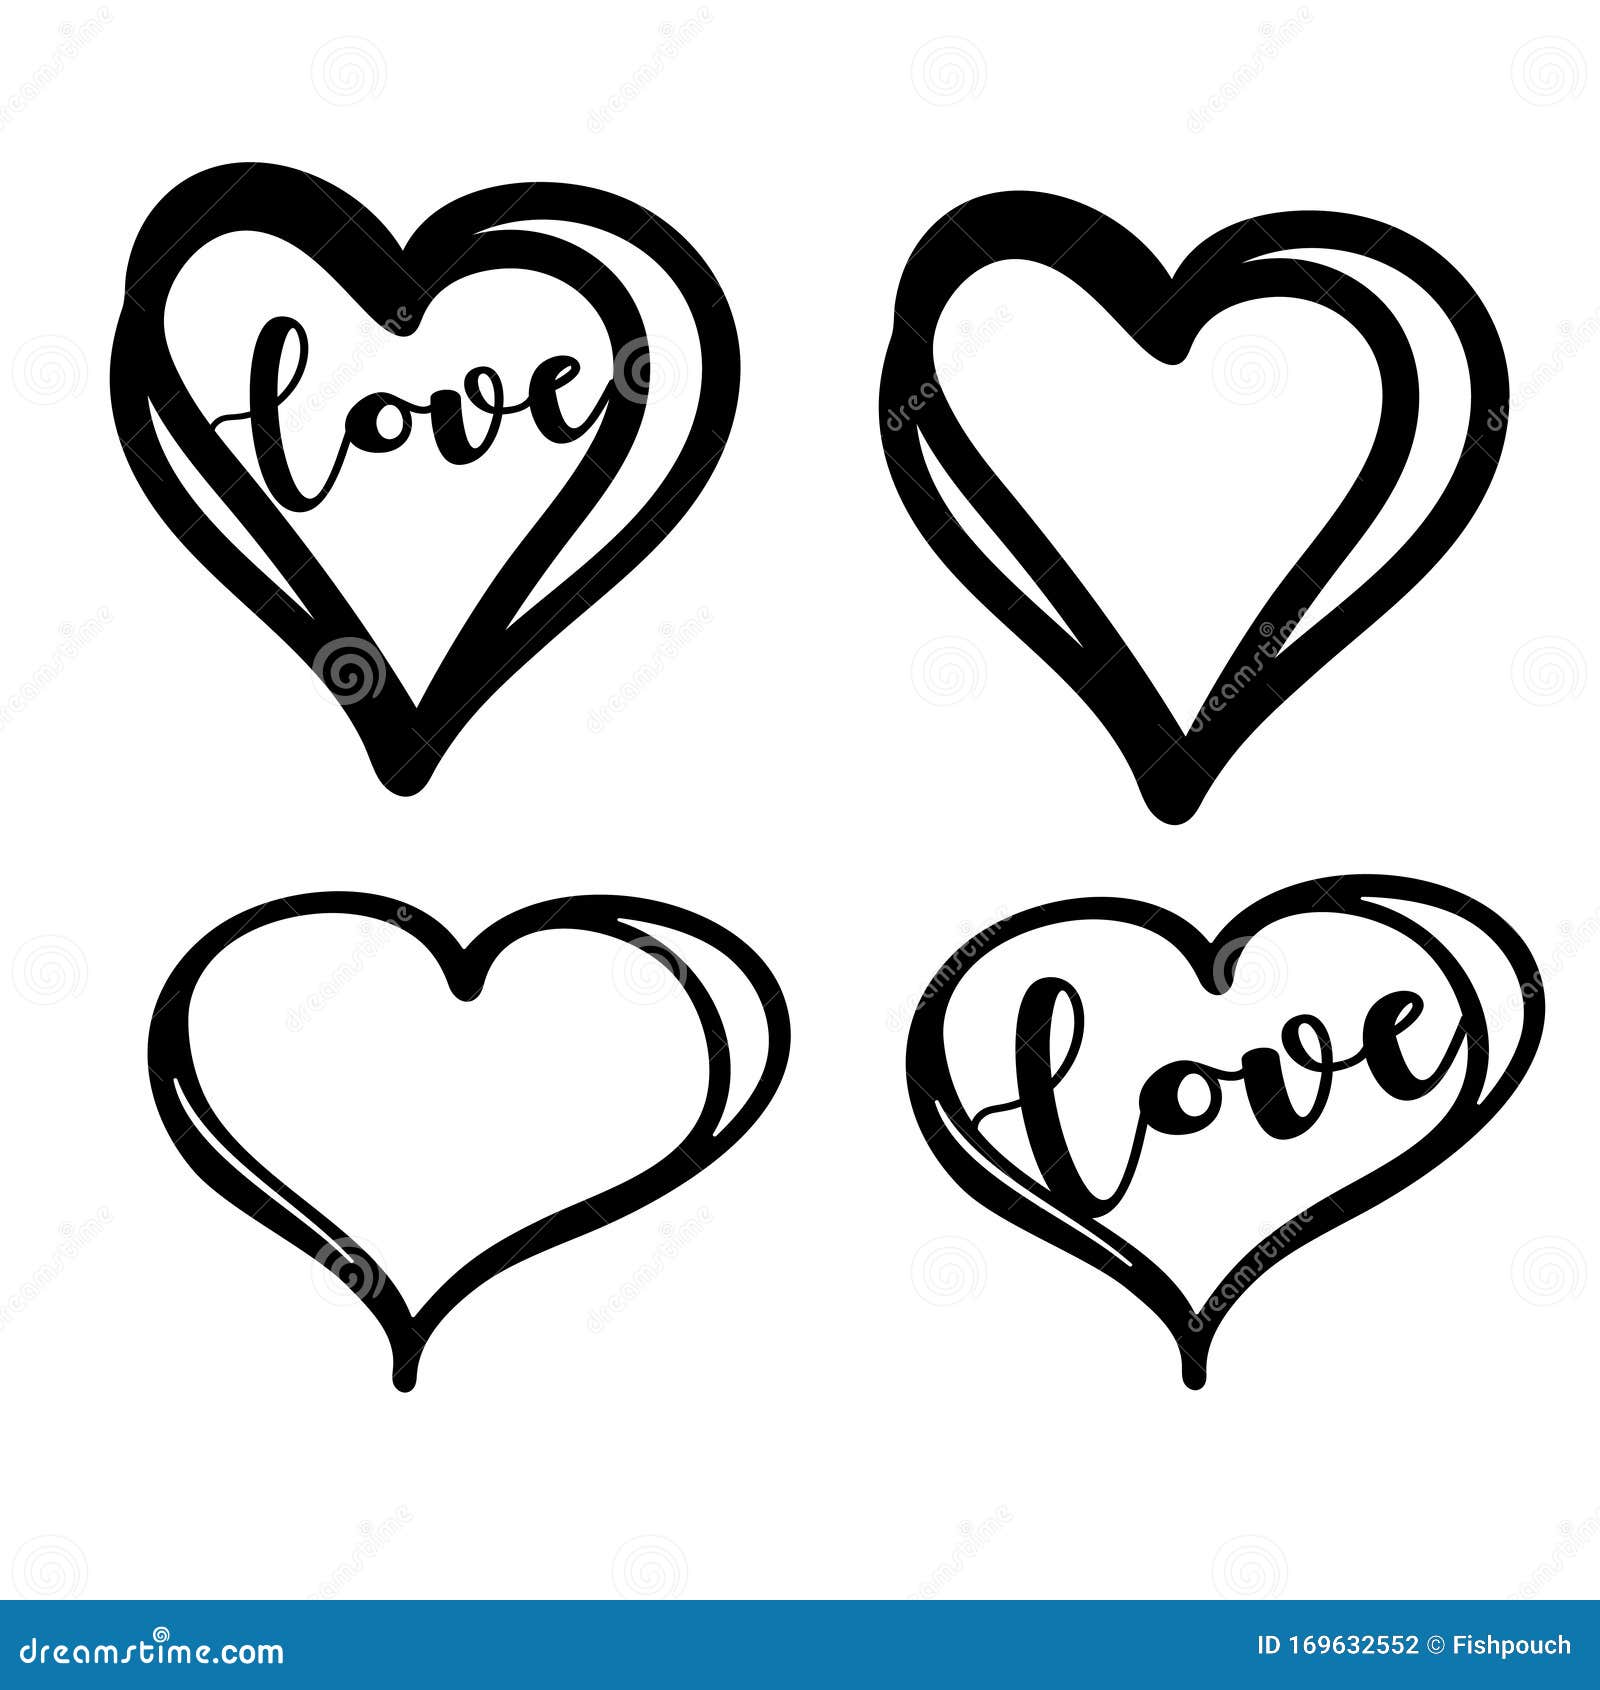 Personalize online this Linear Hand-drawn Hearts Happy Valentine's Day  Desktop Wallpaper template